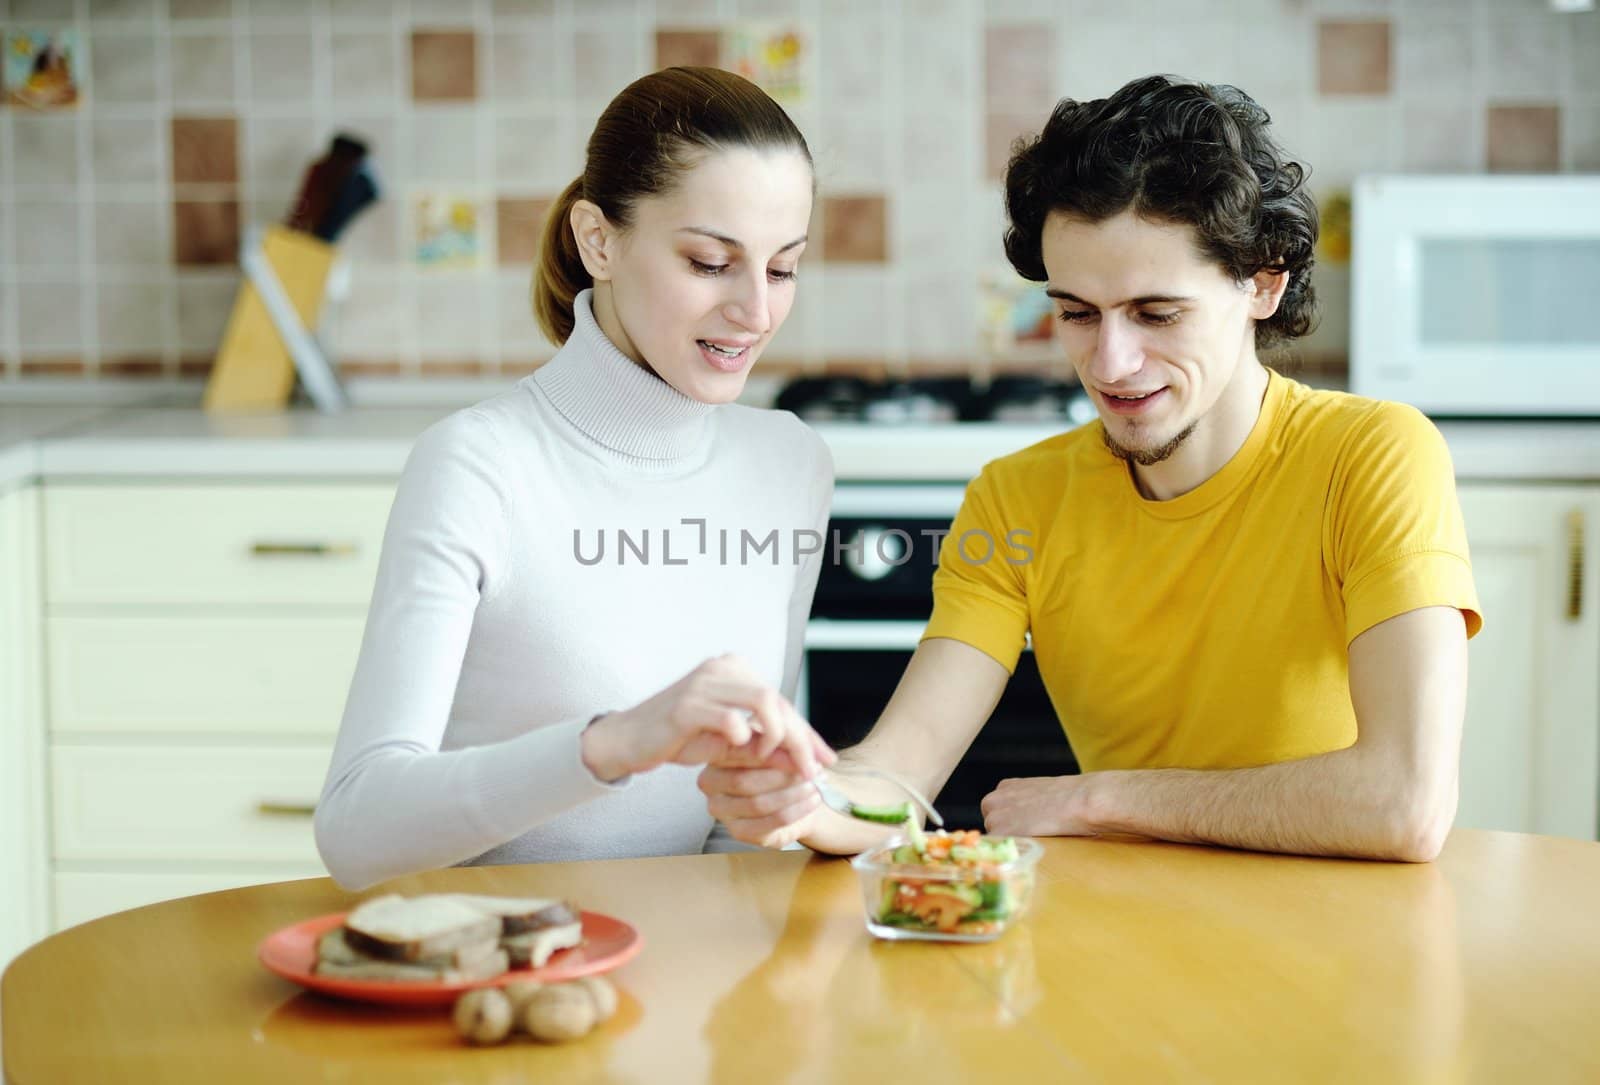 Funny scene of young happy couple playfully eating at kitchen